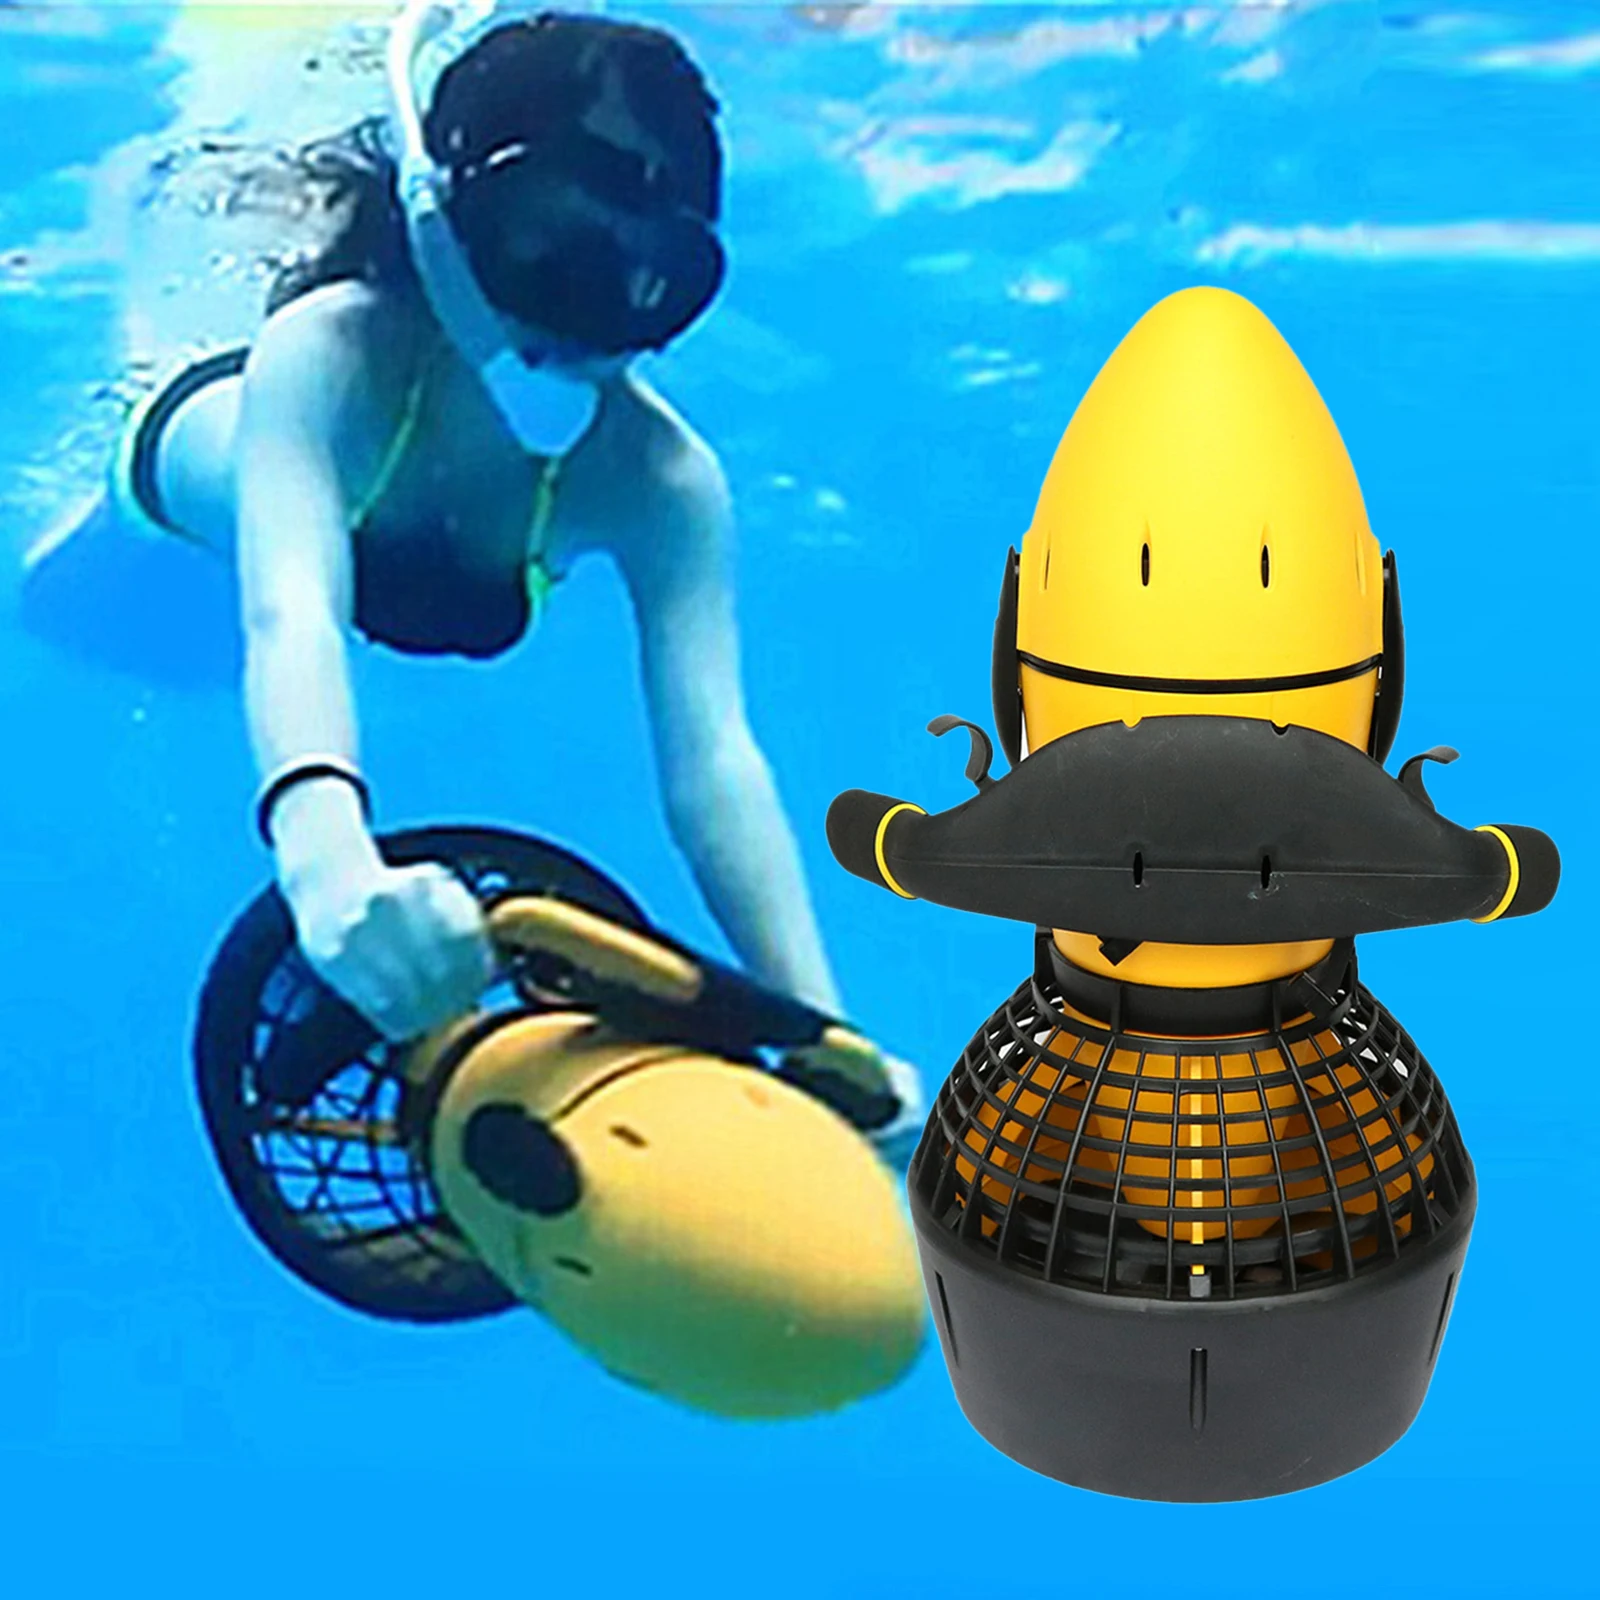 Sea Water Pool 300W Underwater Scooter Water propeller Underwater Diving scooter with battery